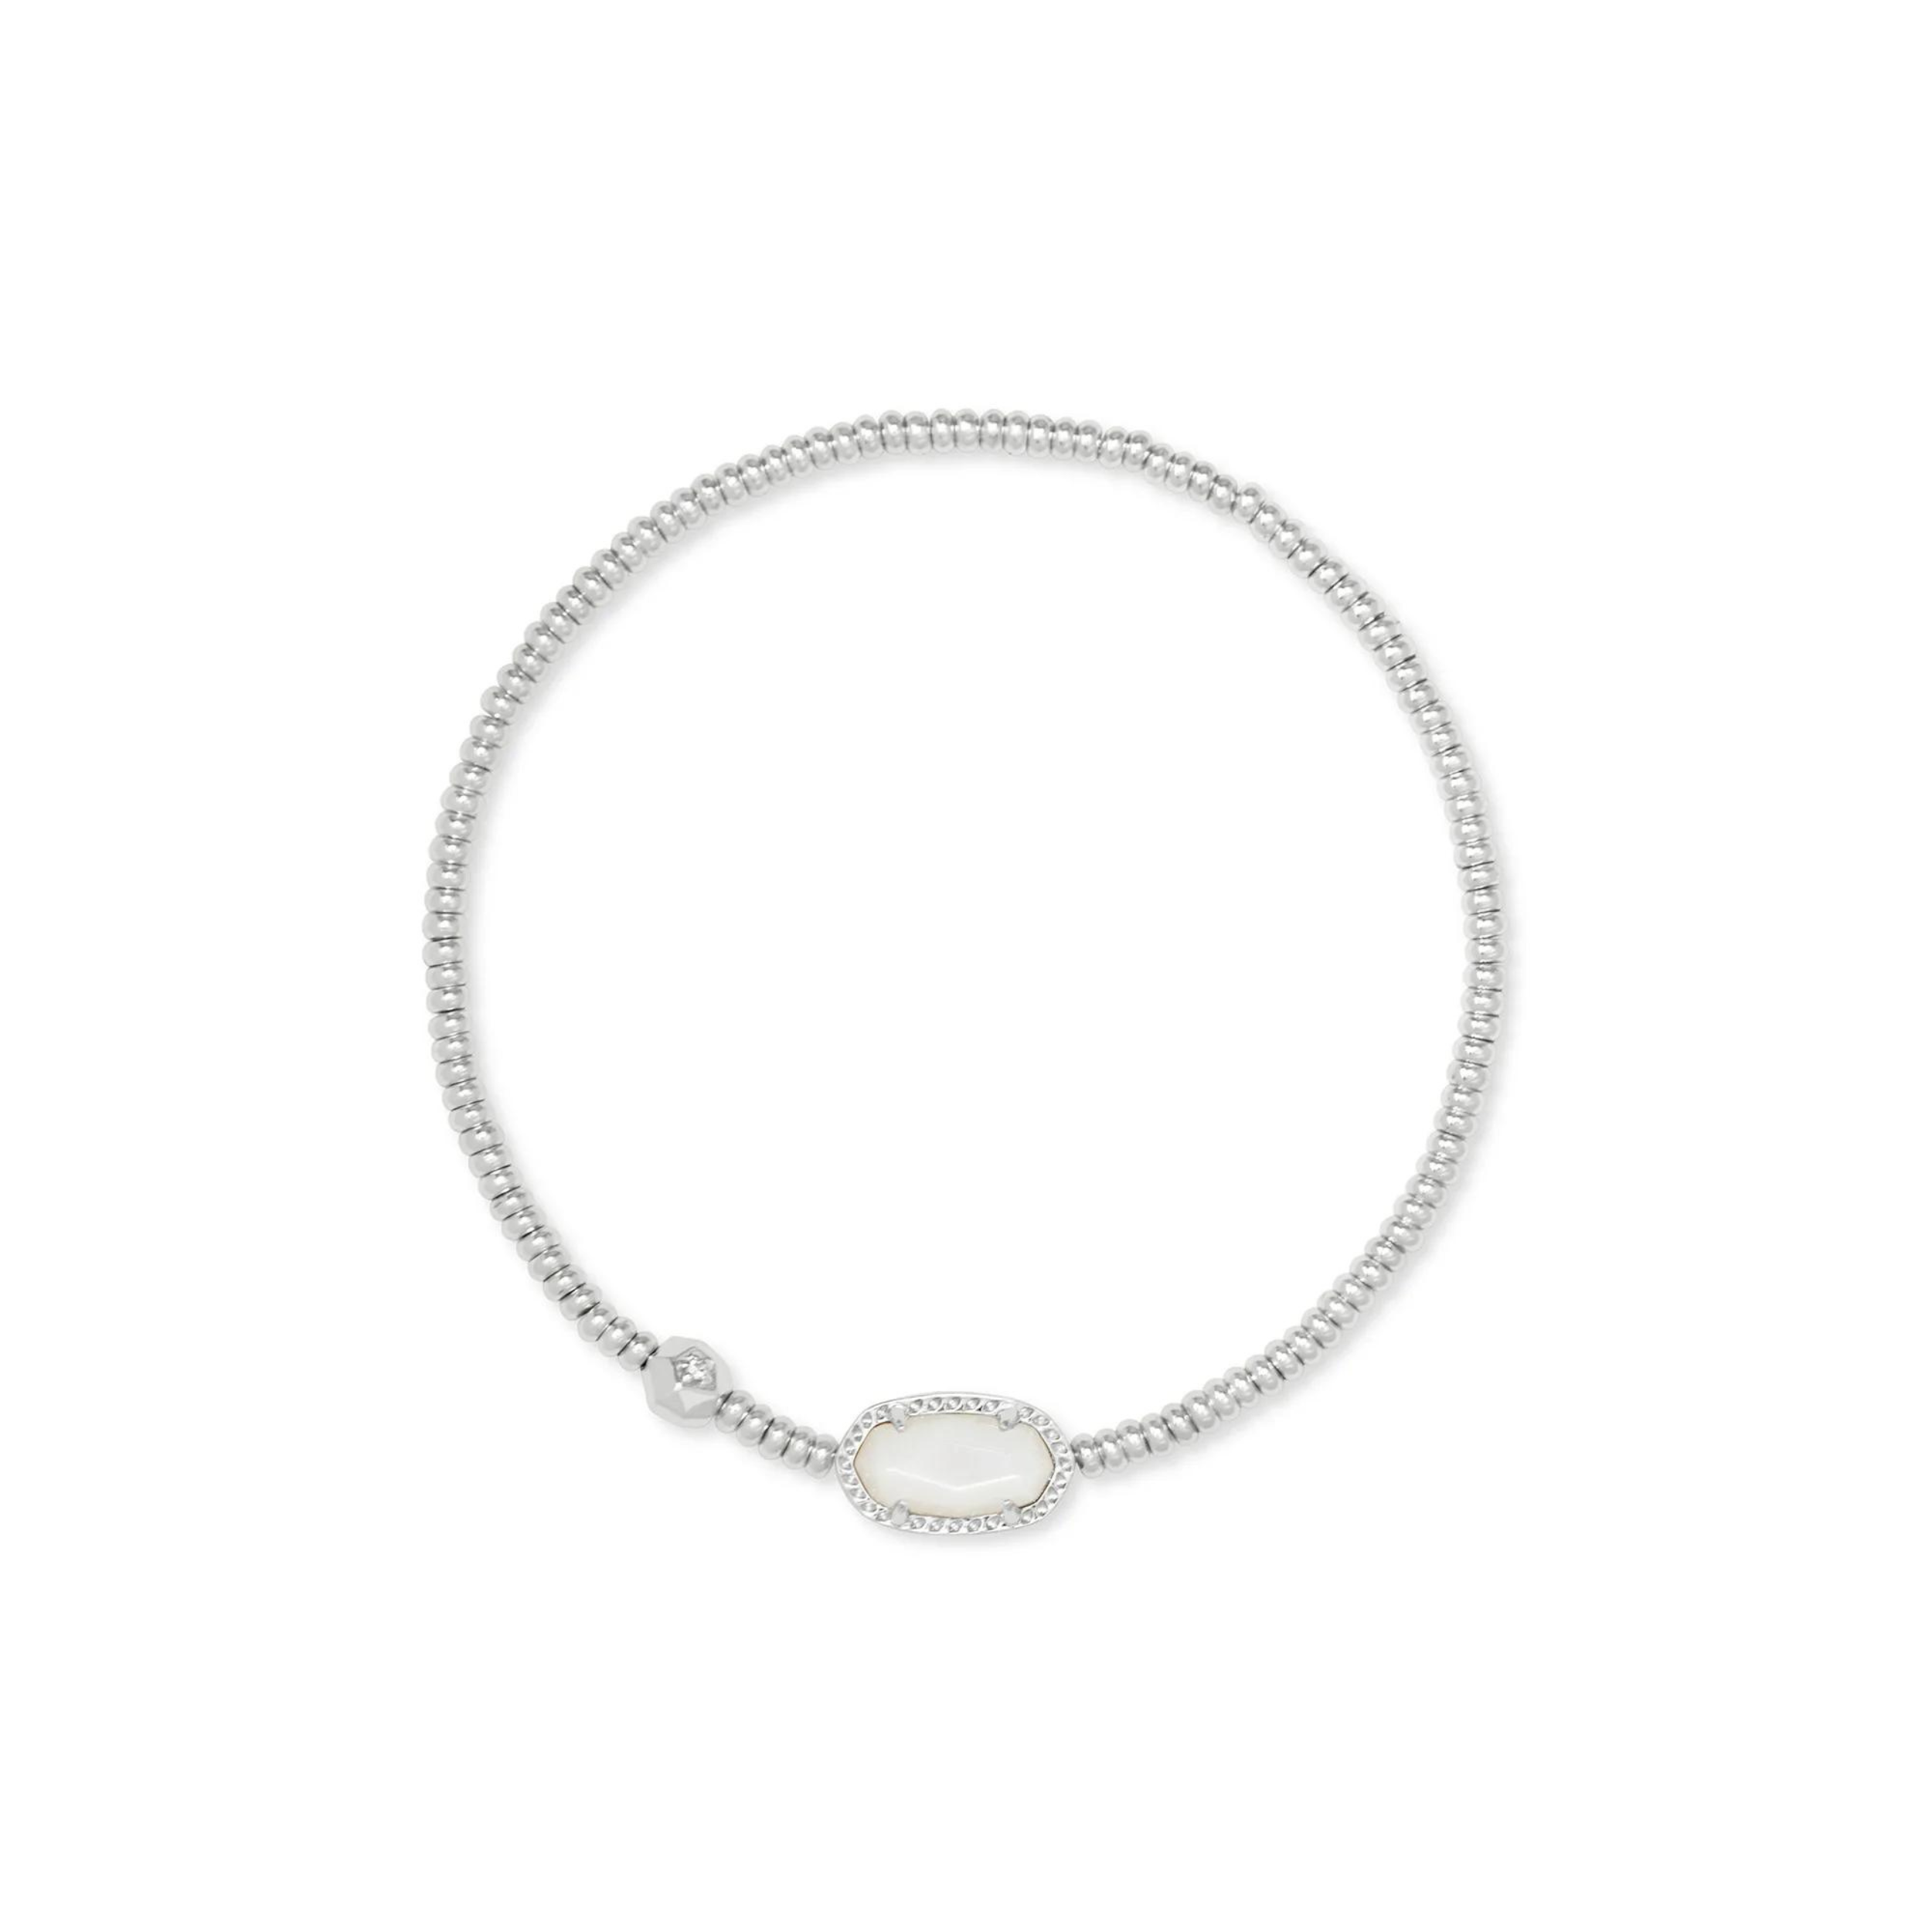 Kendra Scott | Grayson Silver Crystal Stretch Bracelet in Ivory Mother of Pearl - Giddy Up Glamour Boutique